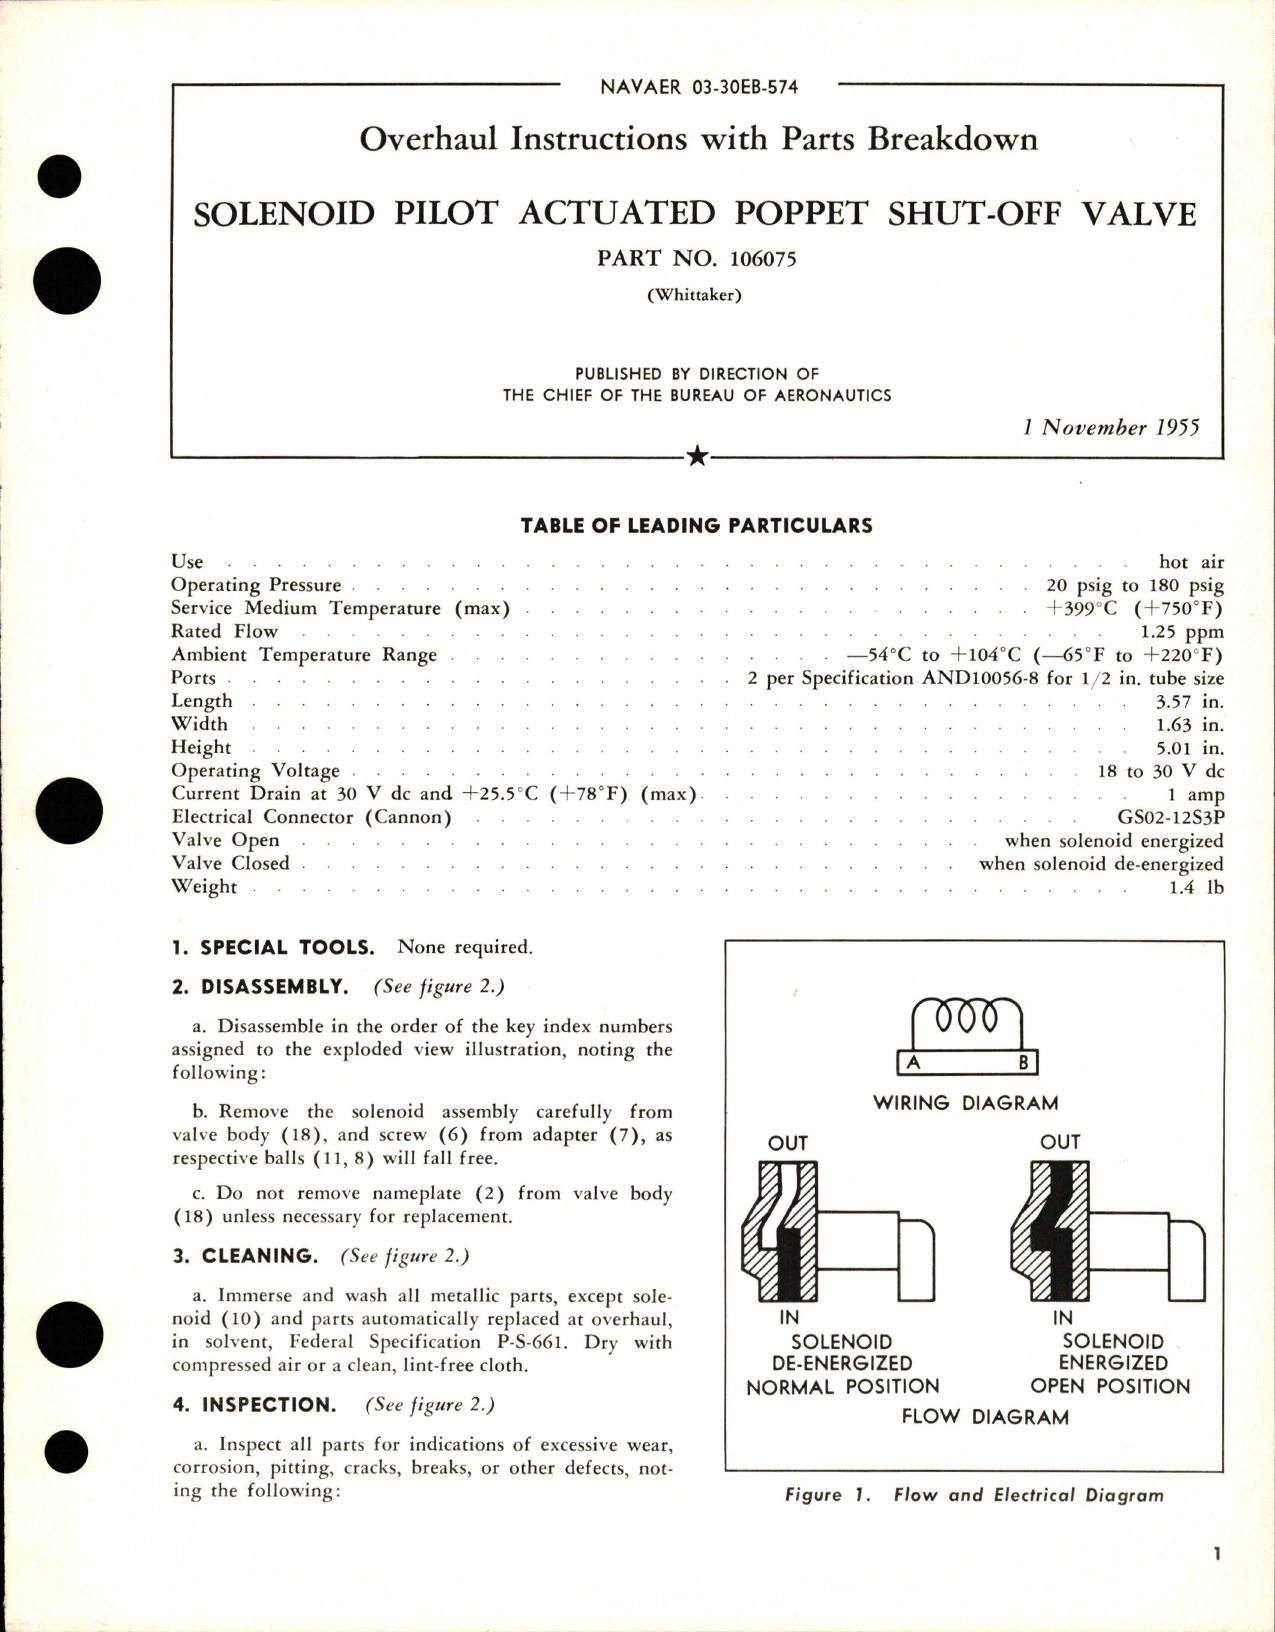 Sample page 1 from AirCorps Library document: Overhaul Instructions with Parts for Solenoid Pilot Actuated Poppet Shut Off Valve - Part 106075